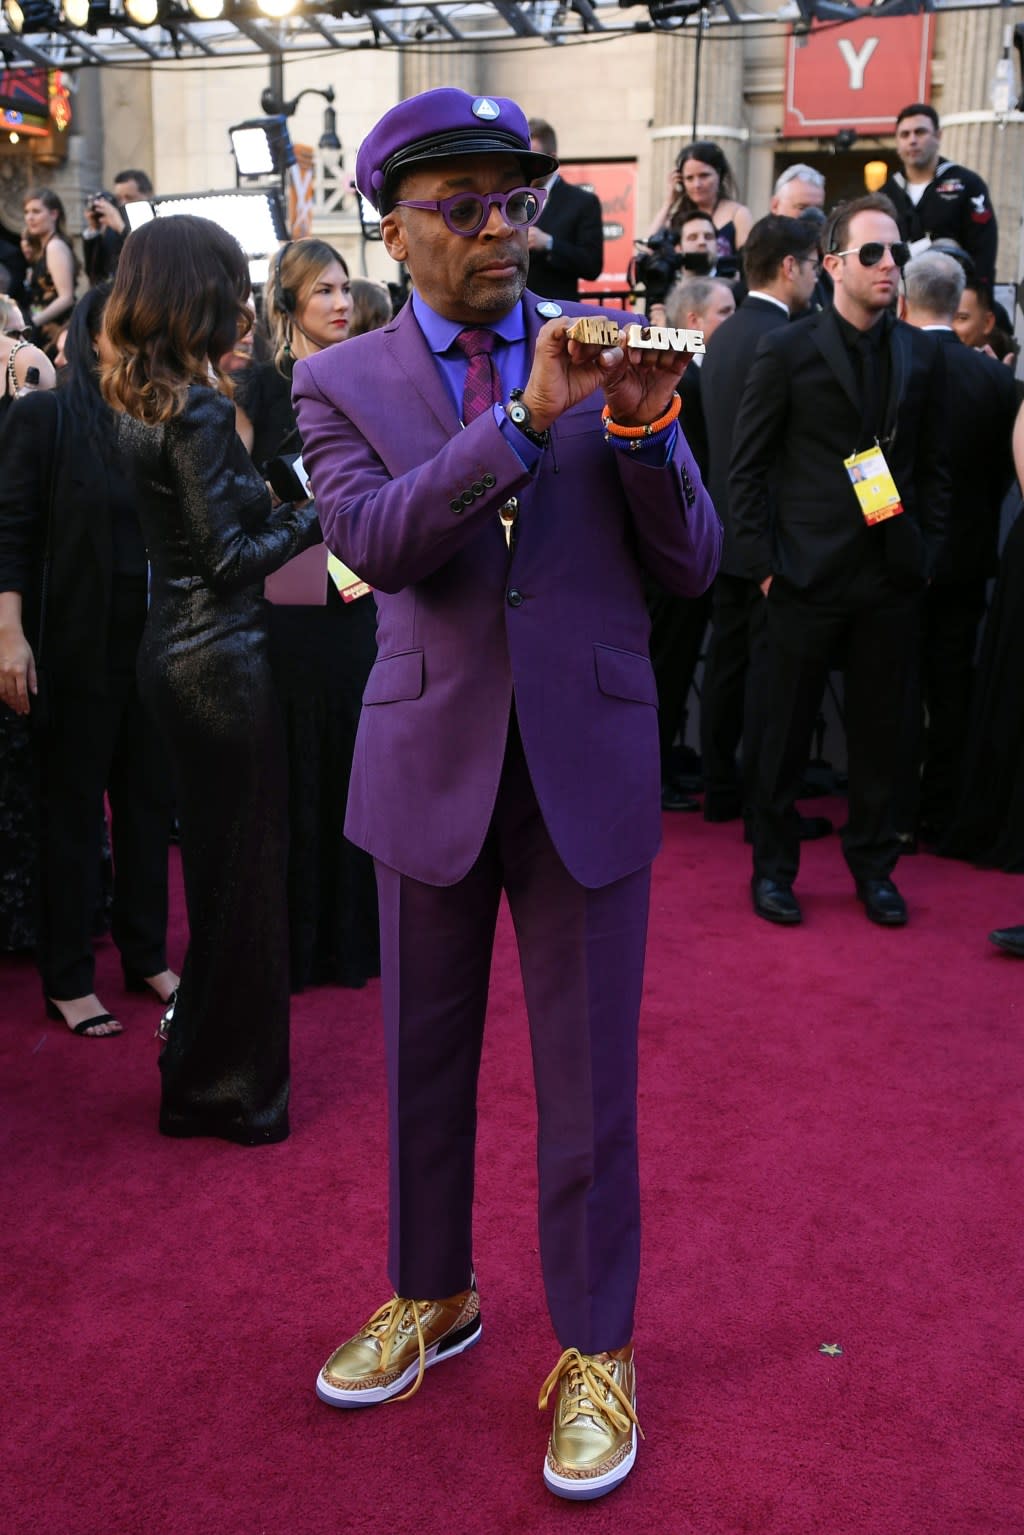 Spike Lee, wearing gold Nike Air Jordan 3s, arrives at the 91st Academy Awards at the Dolby Theatre on Feb. 24, 2019, in Los Angeles. (Photo by Robert Hanashiro-USA TODAY NETWORK)